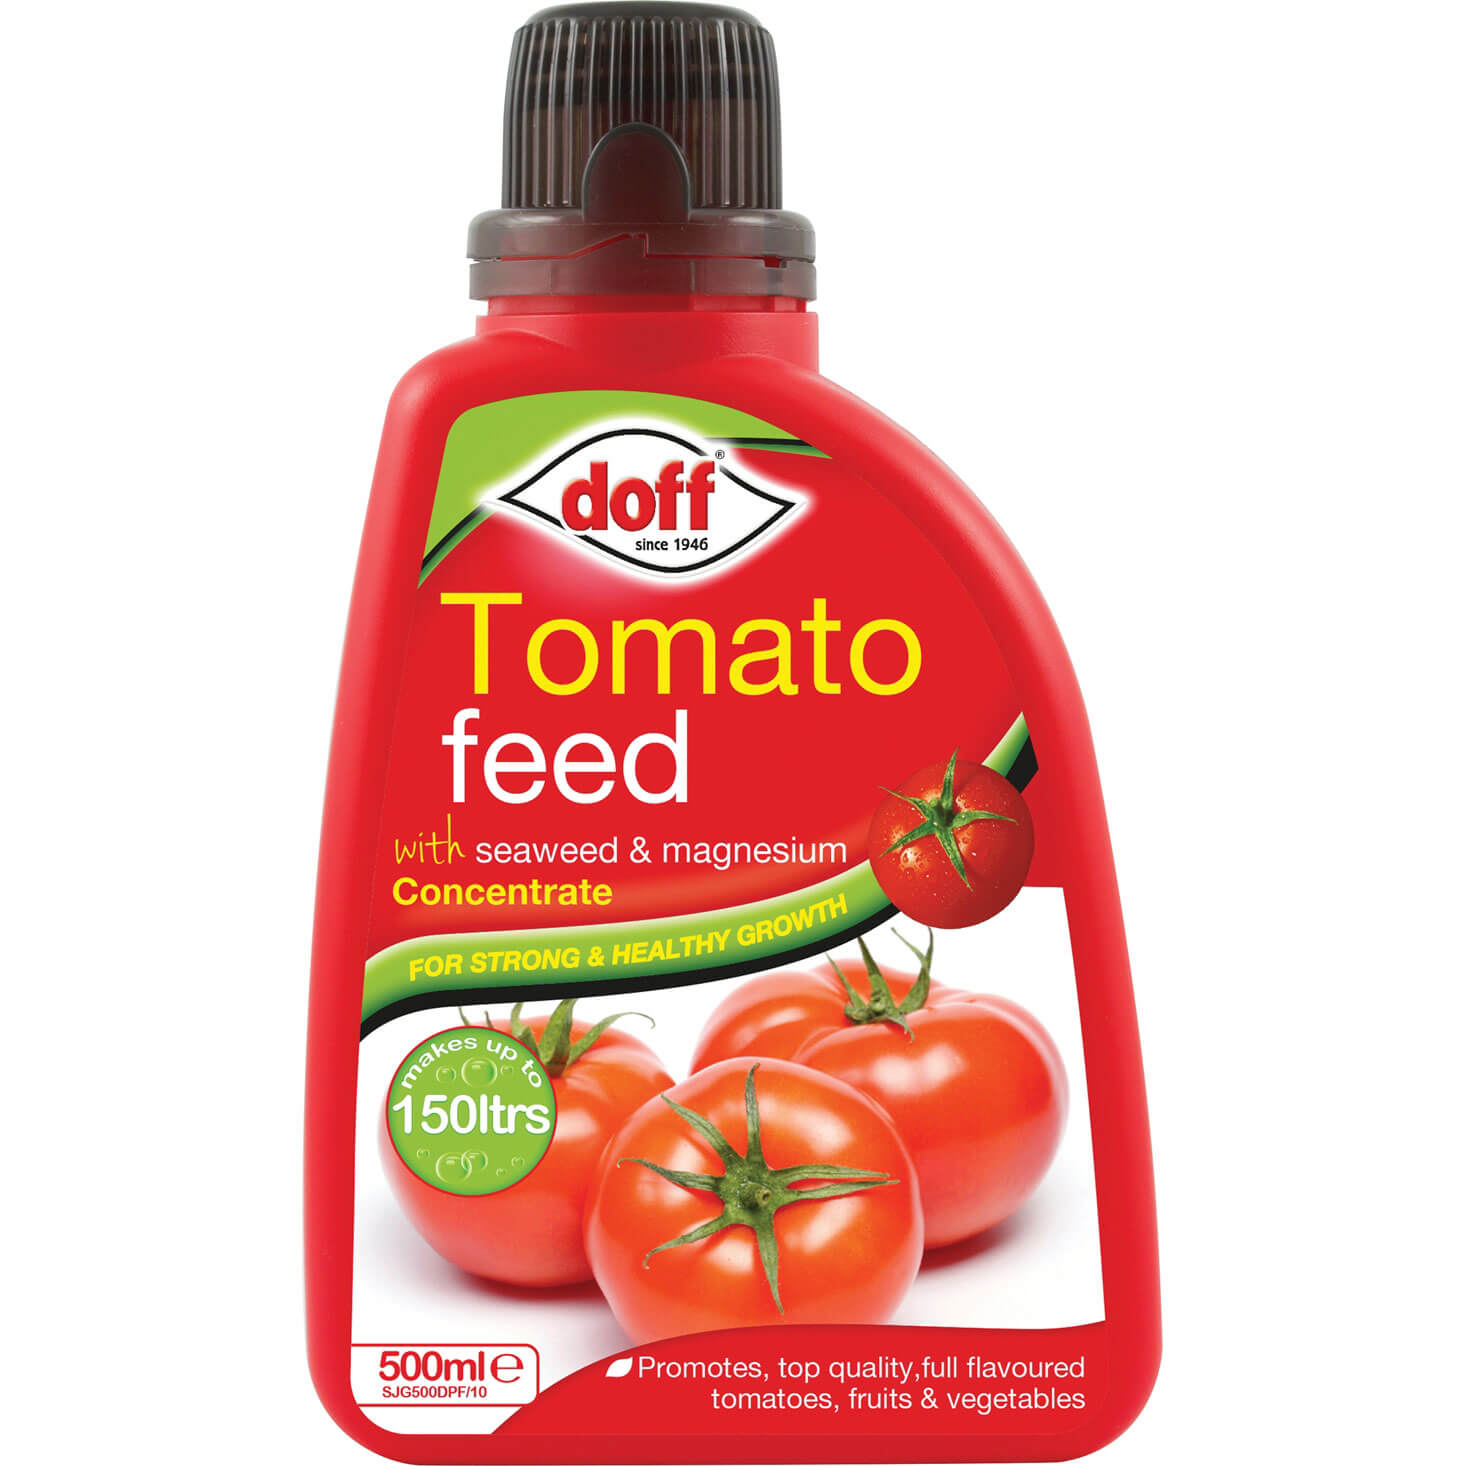 Image of Doff Tomato Feed Concentrate 500ml